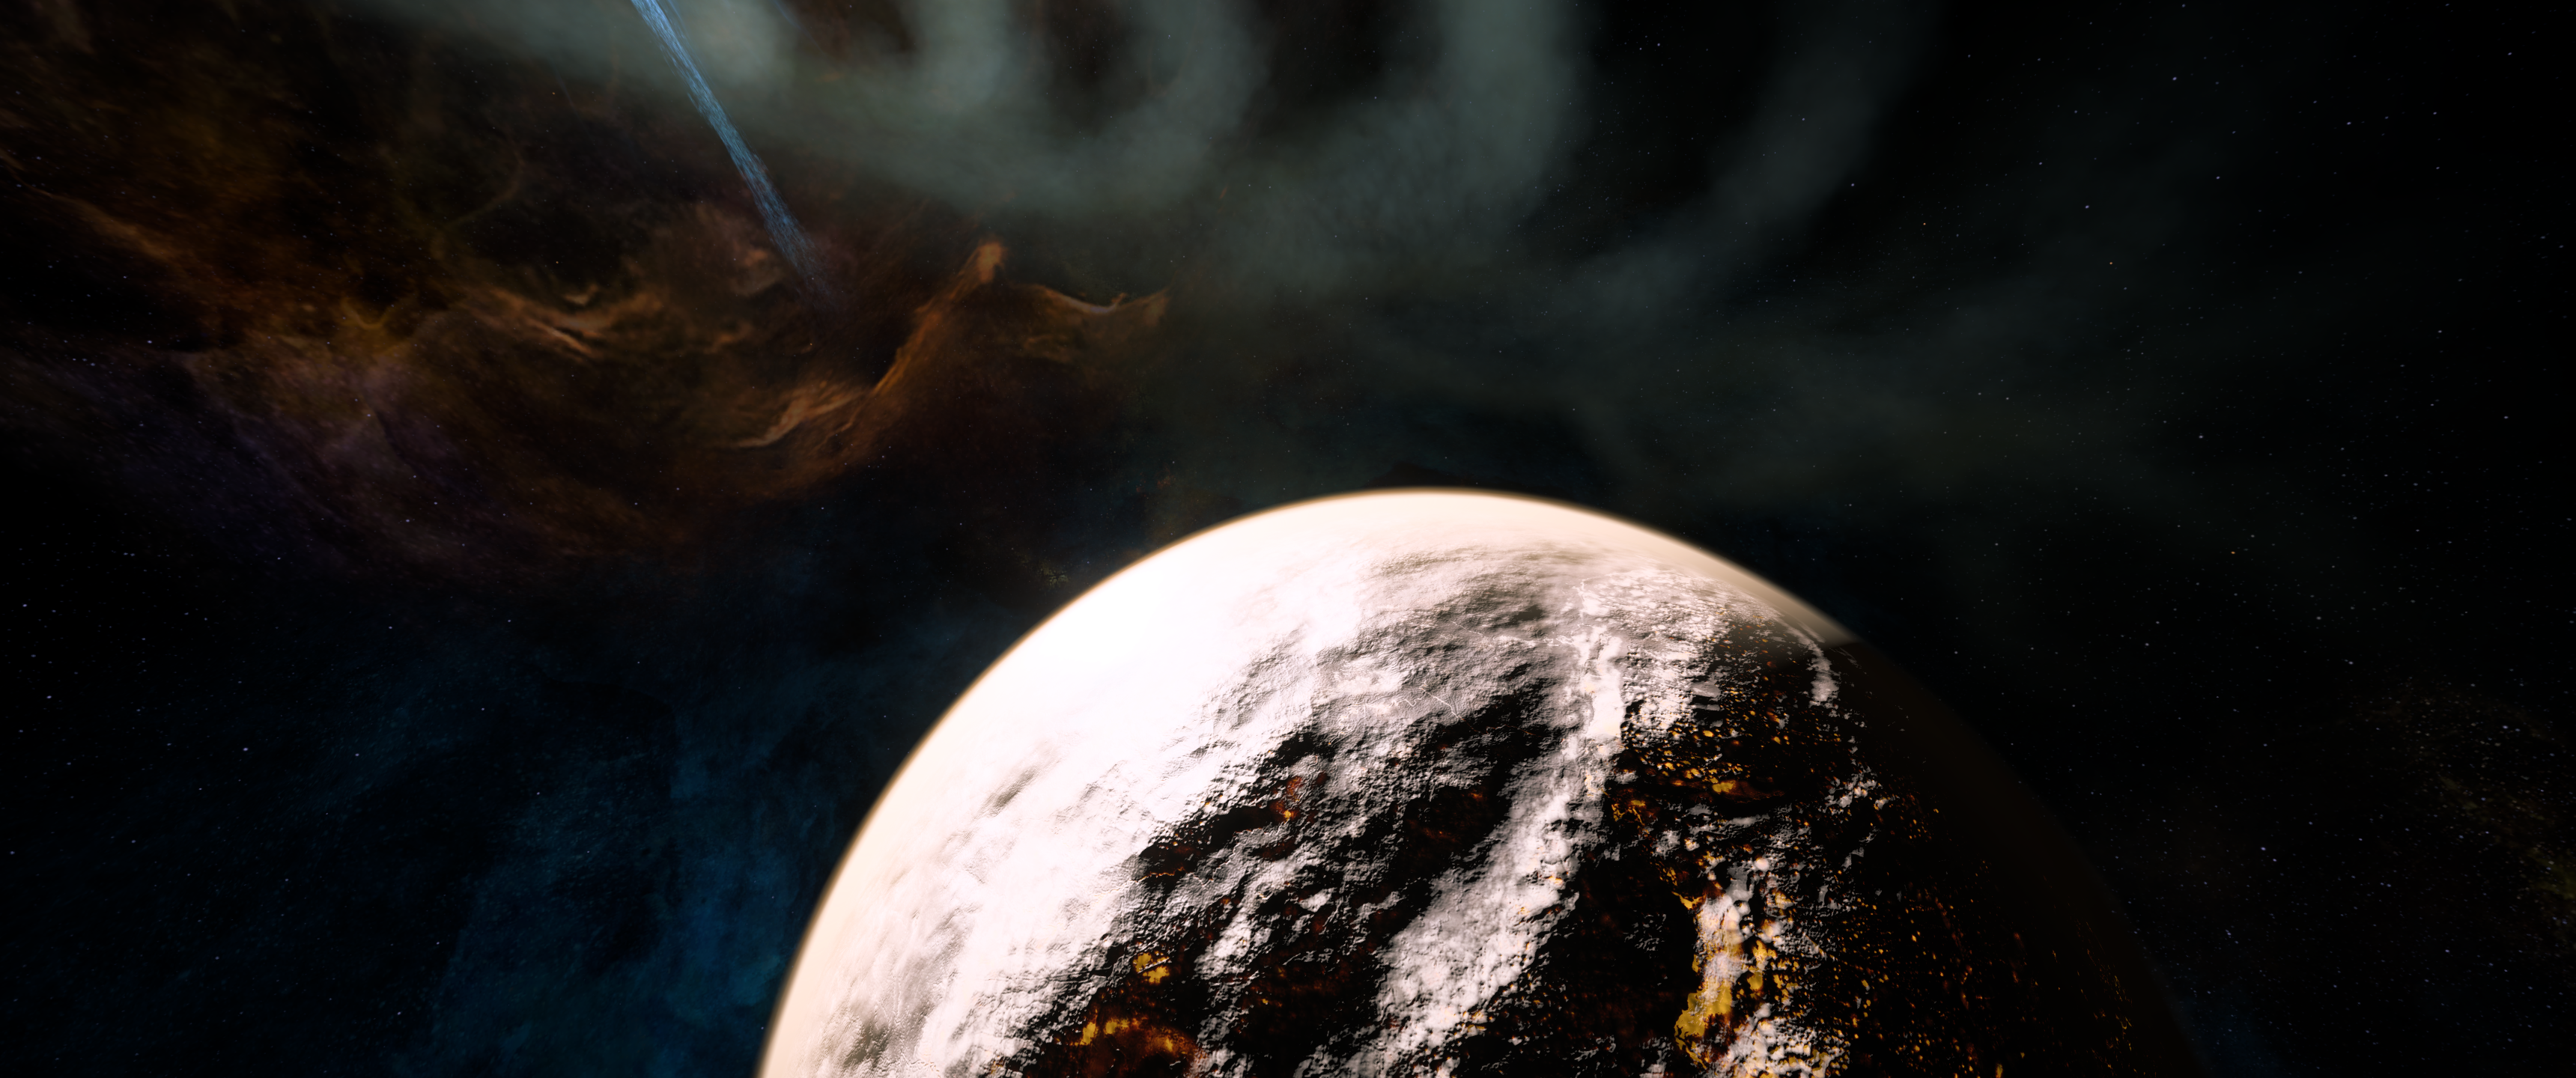 General 3440x1440 space Mass Effect planet Mass Effect: Andromeda video games science fiction PC gaming